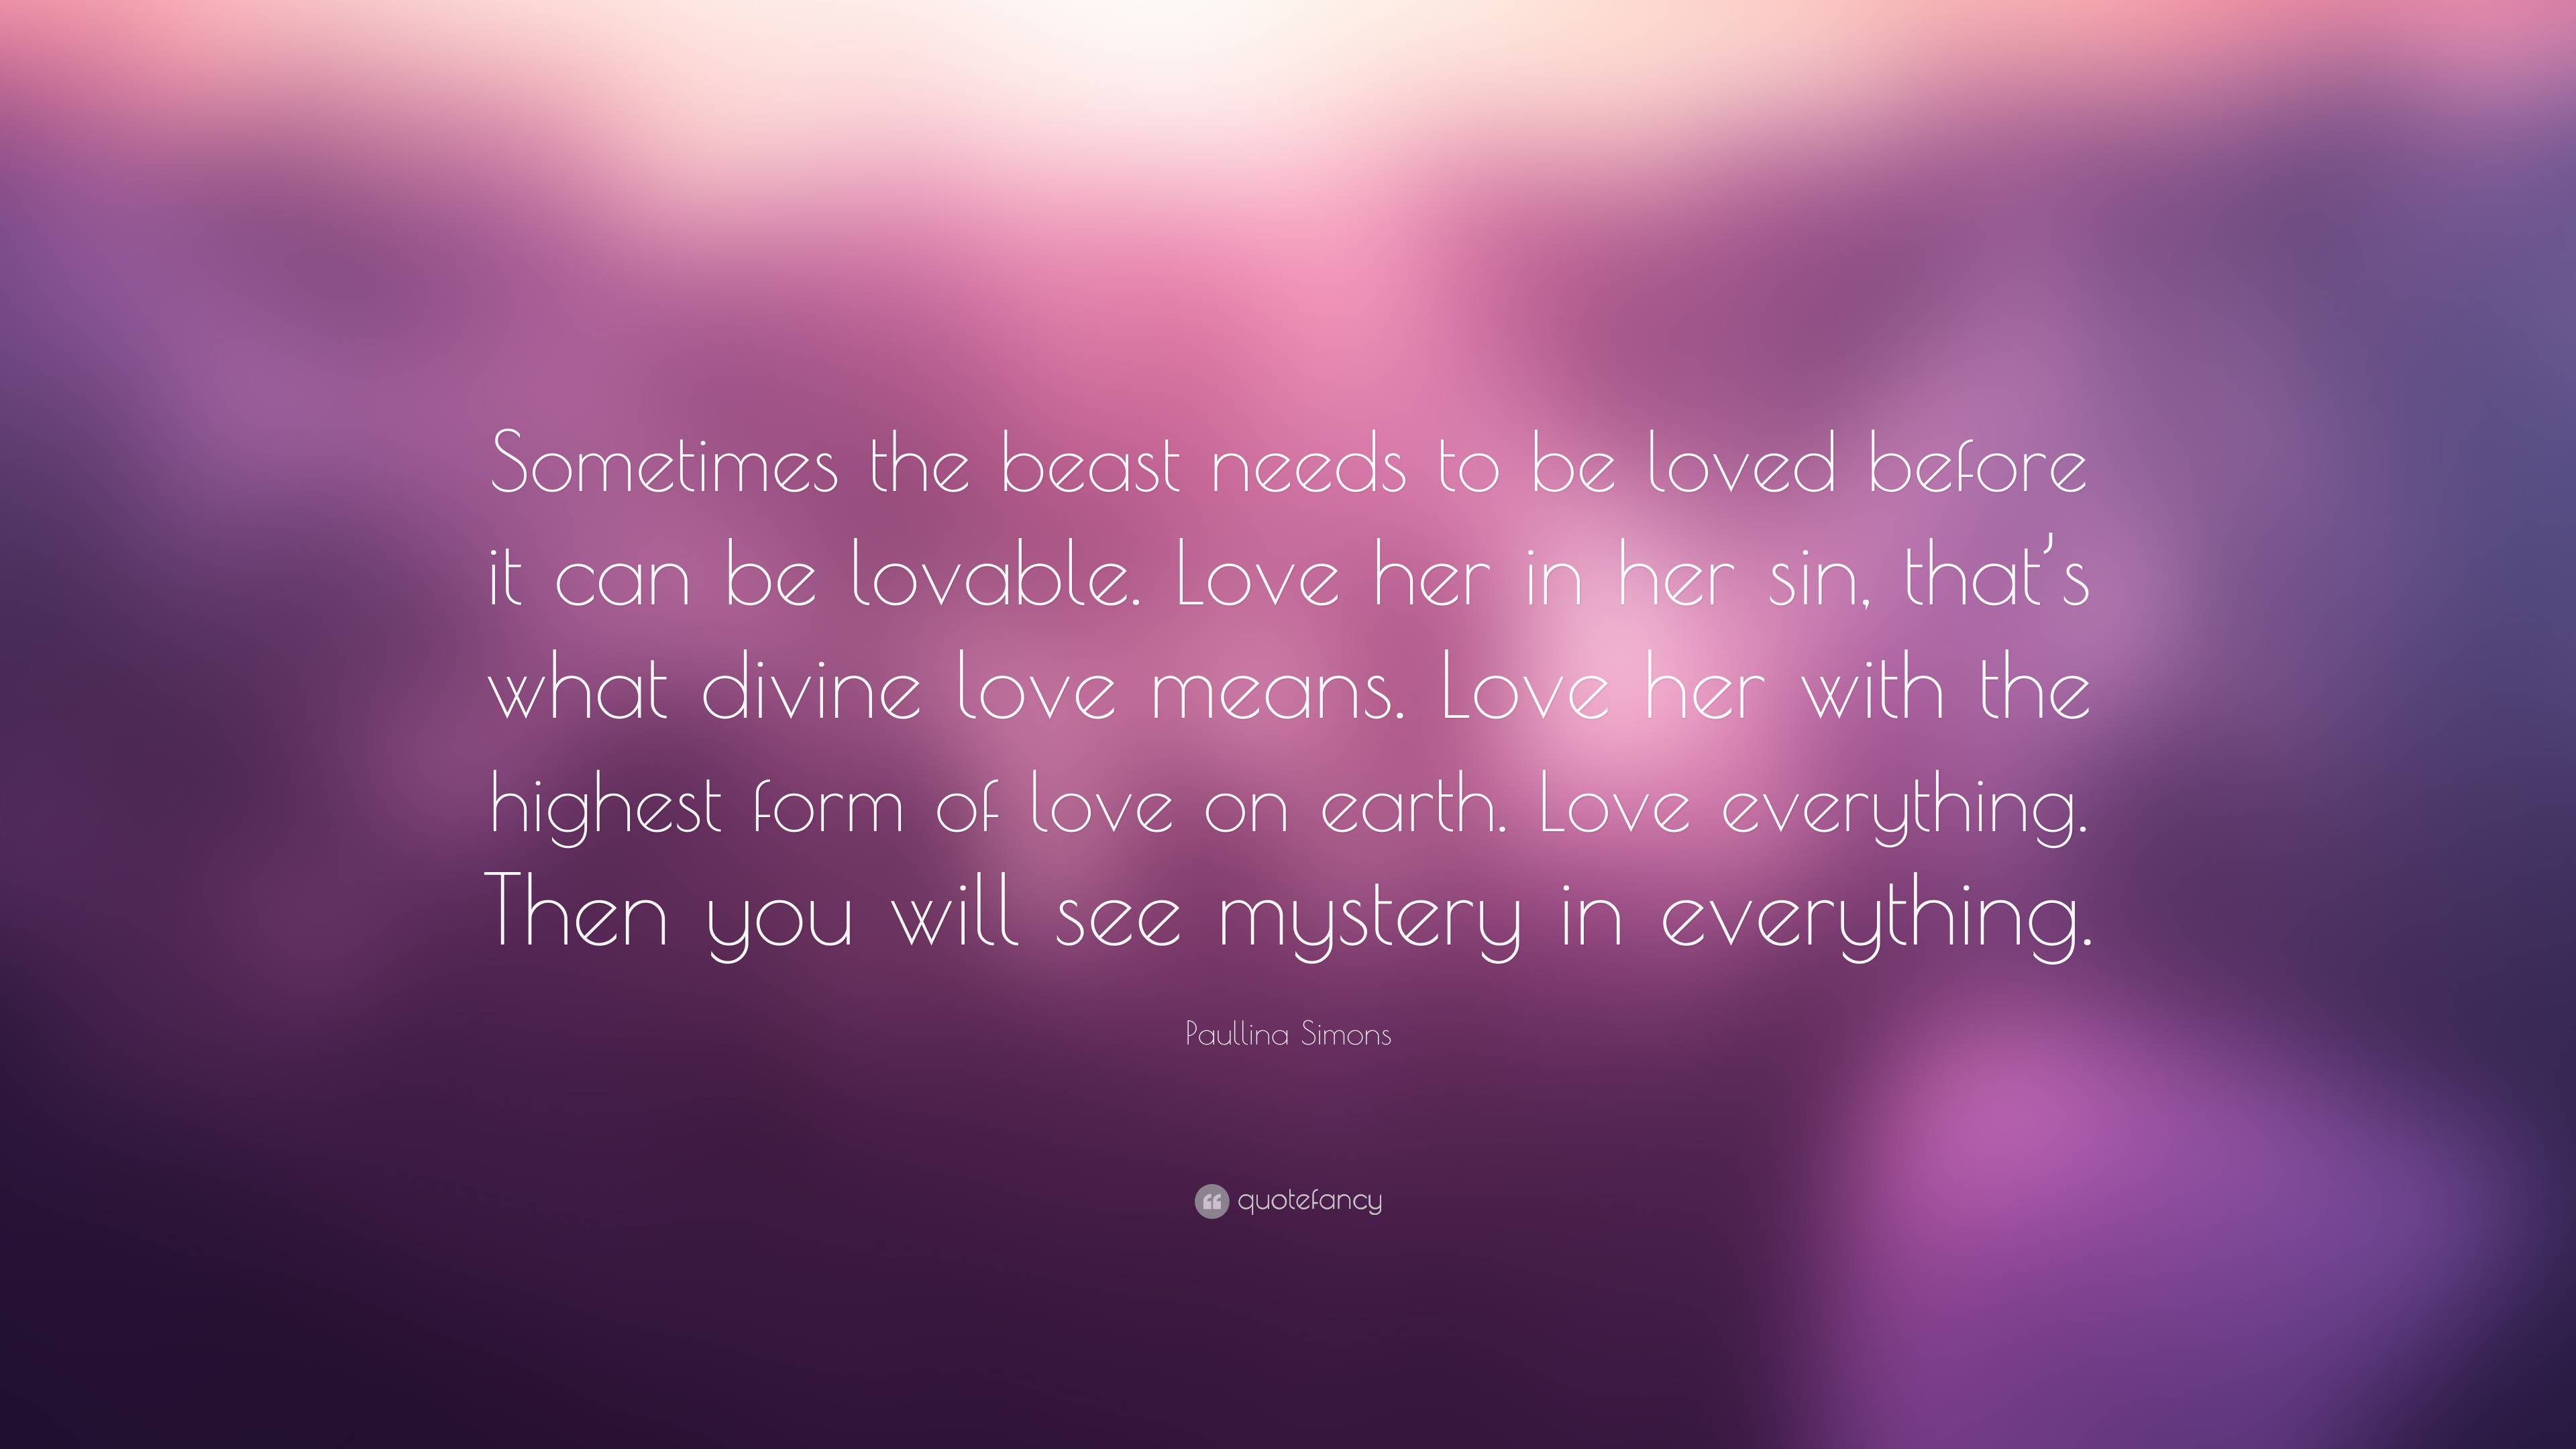 Paullina Simons Quote: “Sometimes the beast needs to be loved before it ...